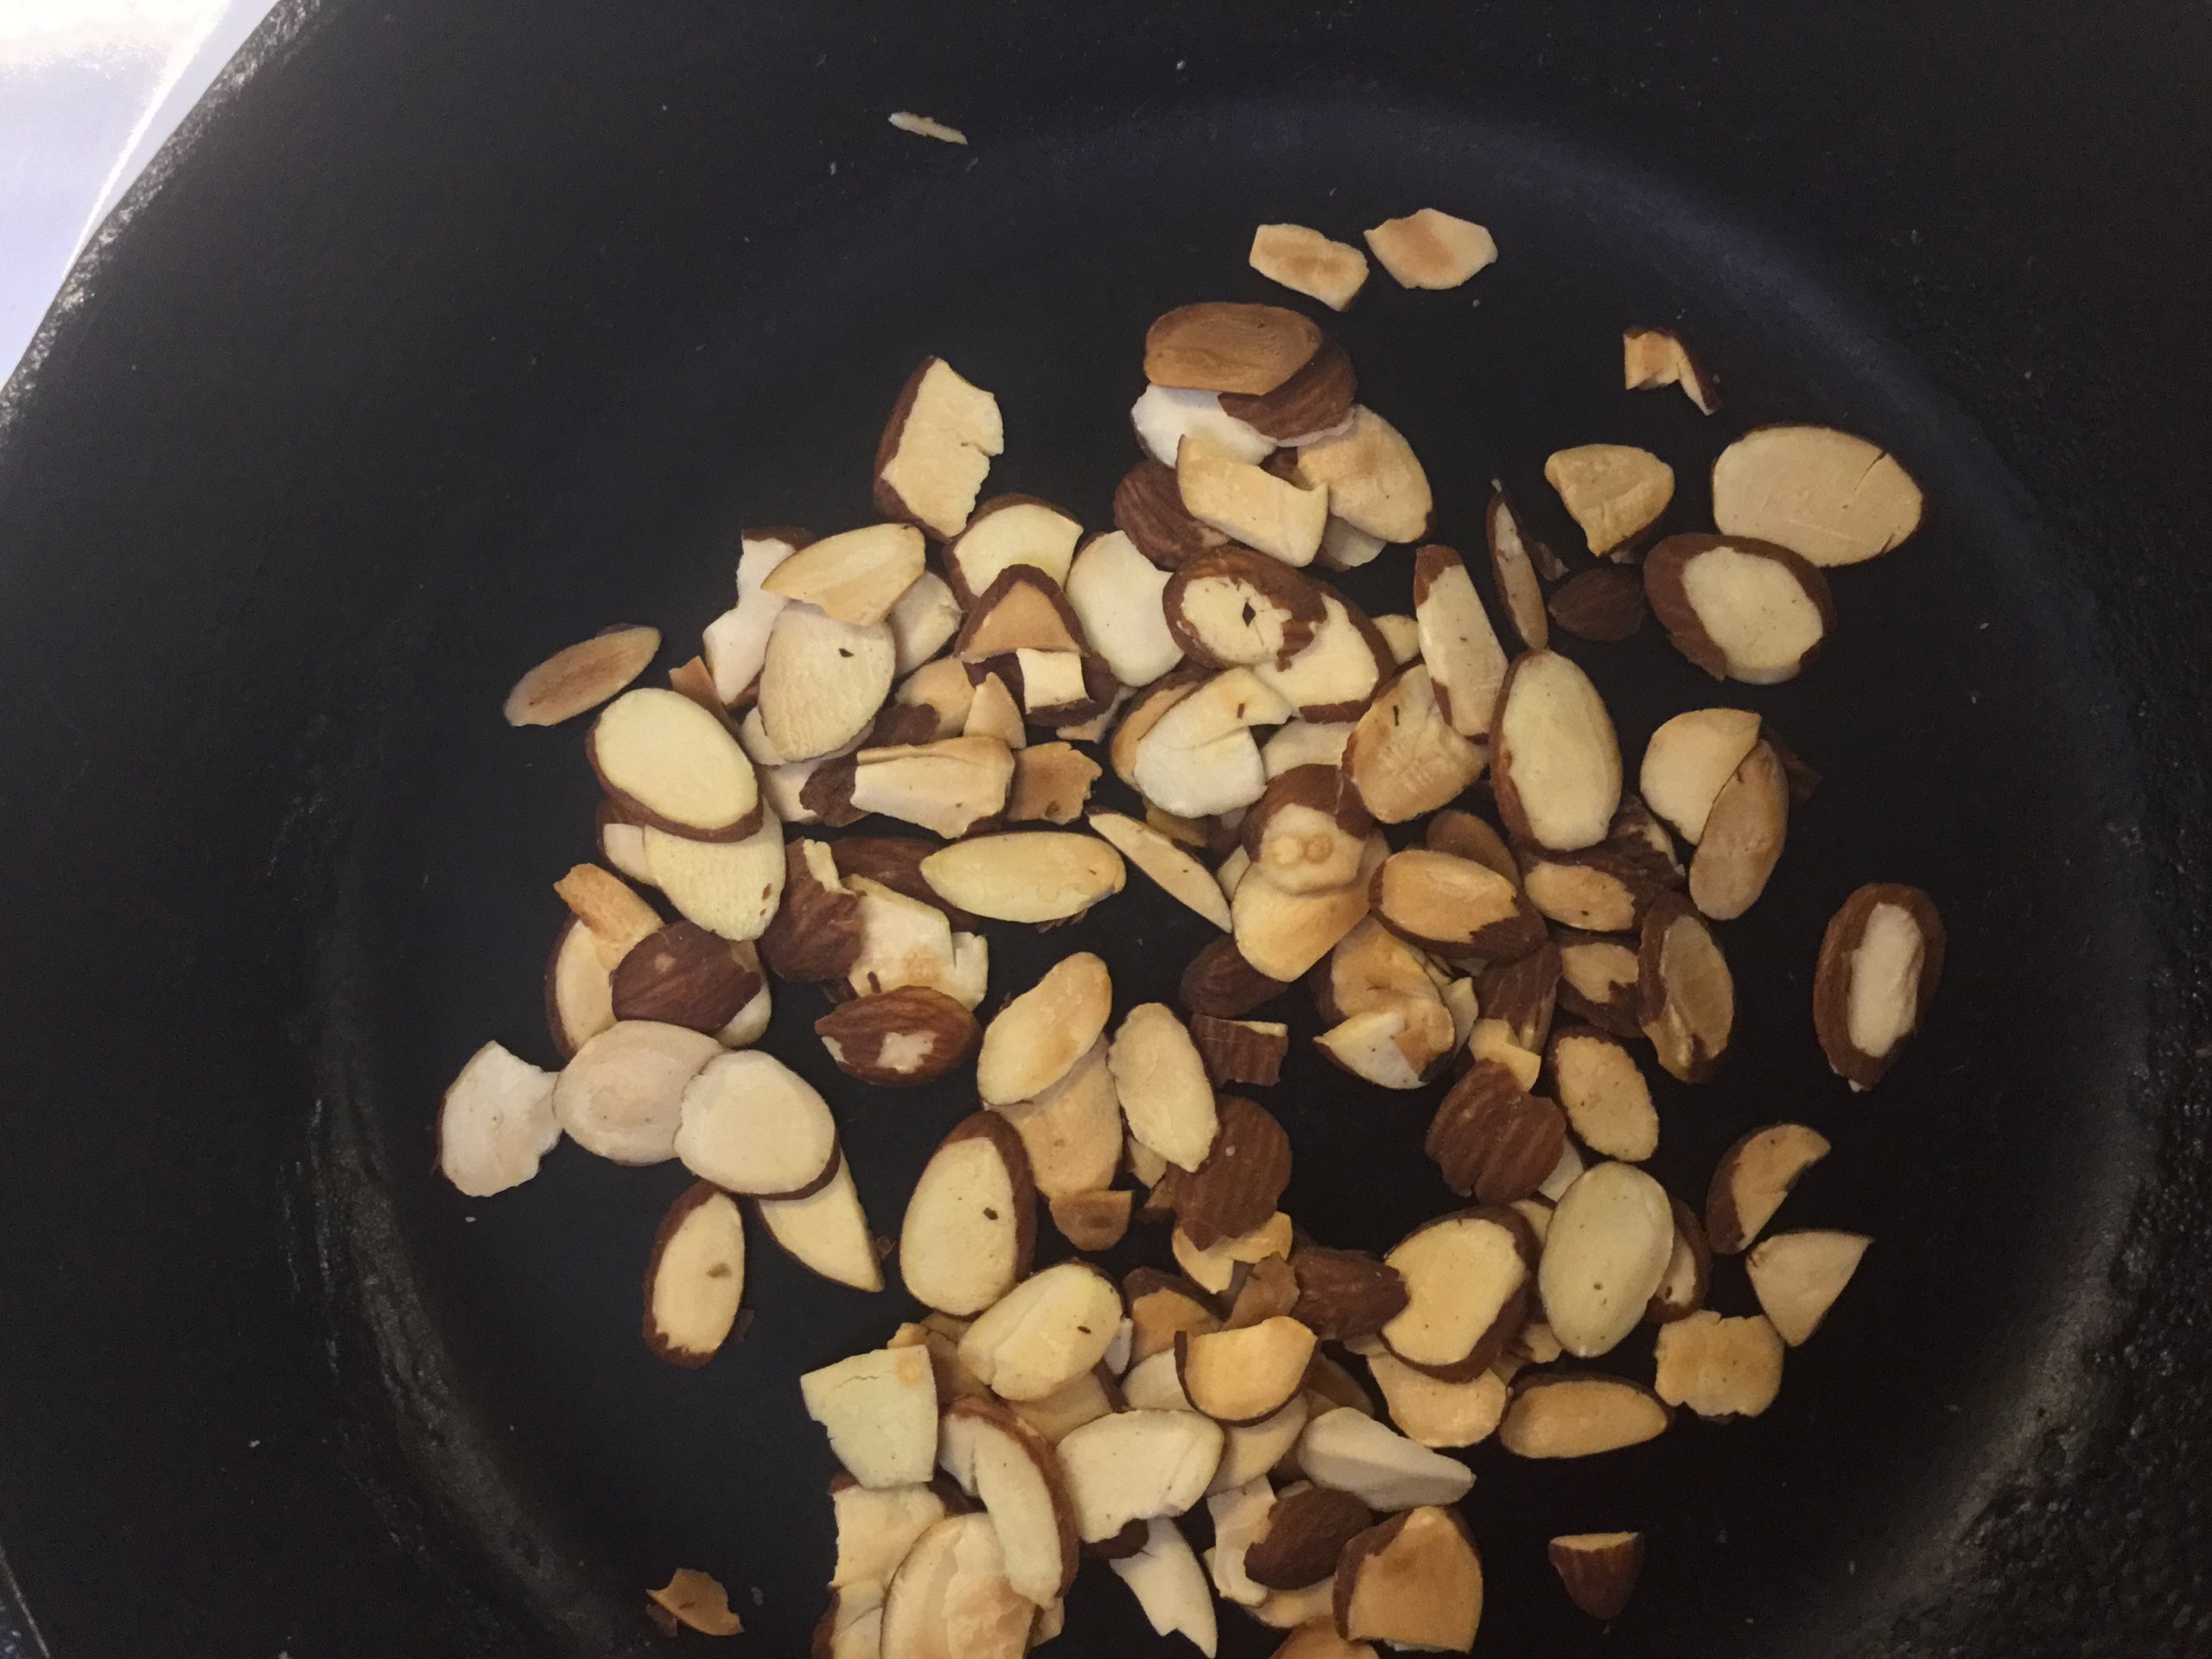 Toasted almonds